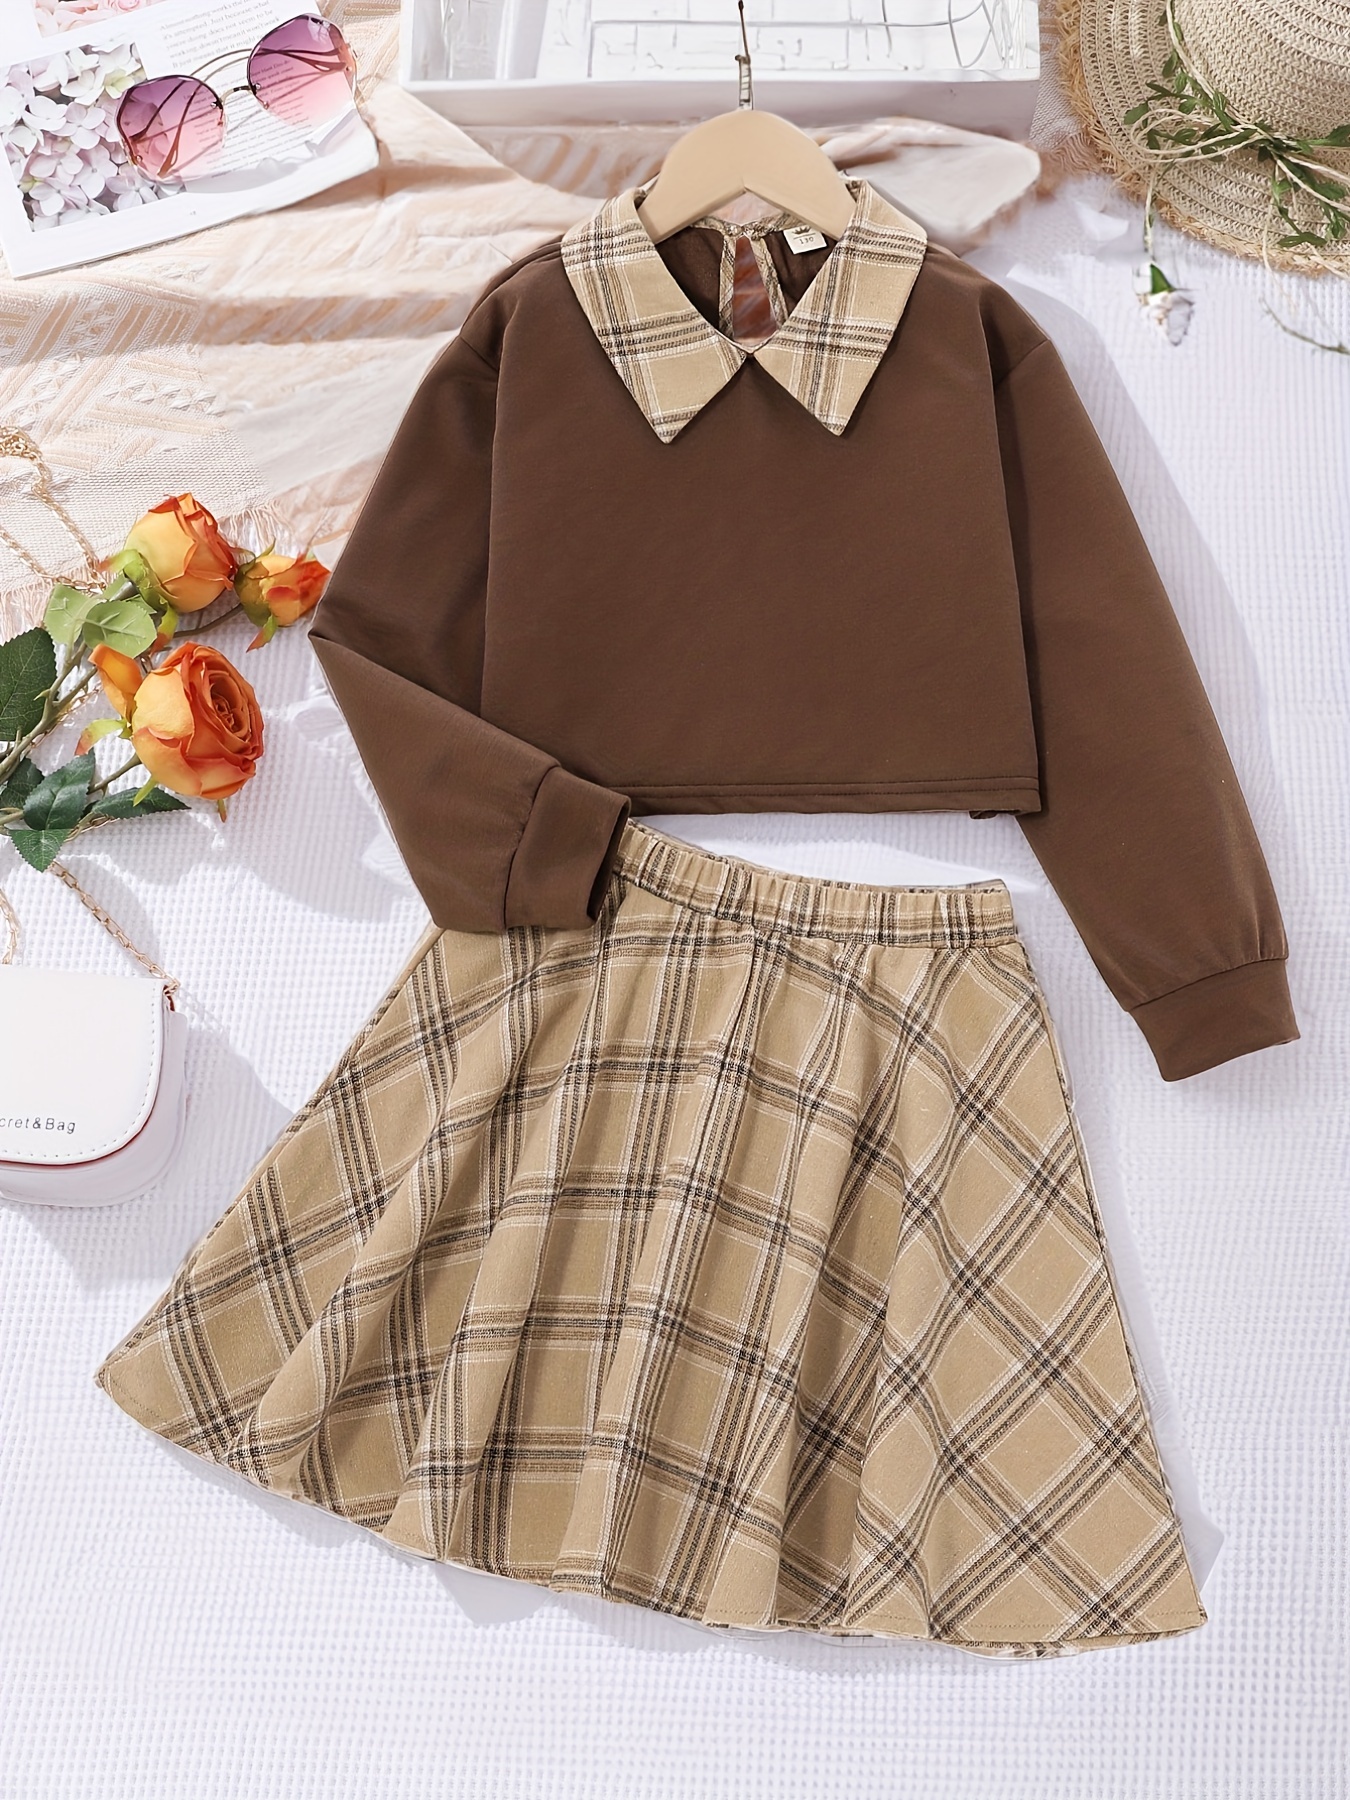 Autumn Spring Fashion Plaid Jackets And Skirts Outfits Suits For Girls 2  Piece Clothing Sets Kid Children School Uniform Clothes - AliExpress